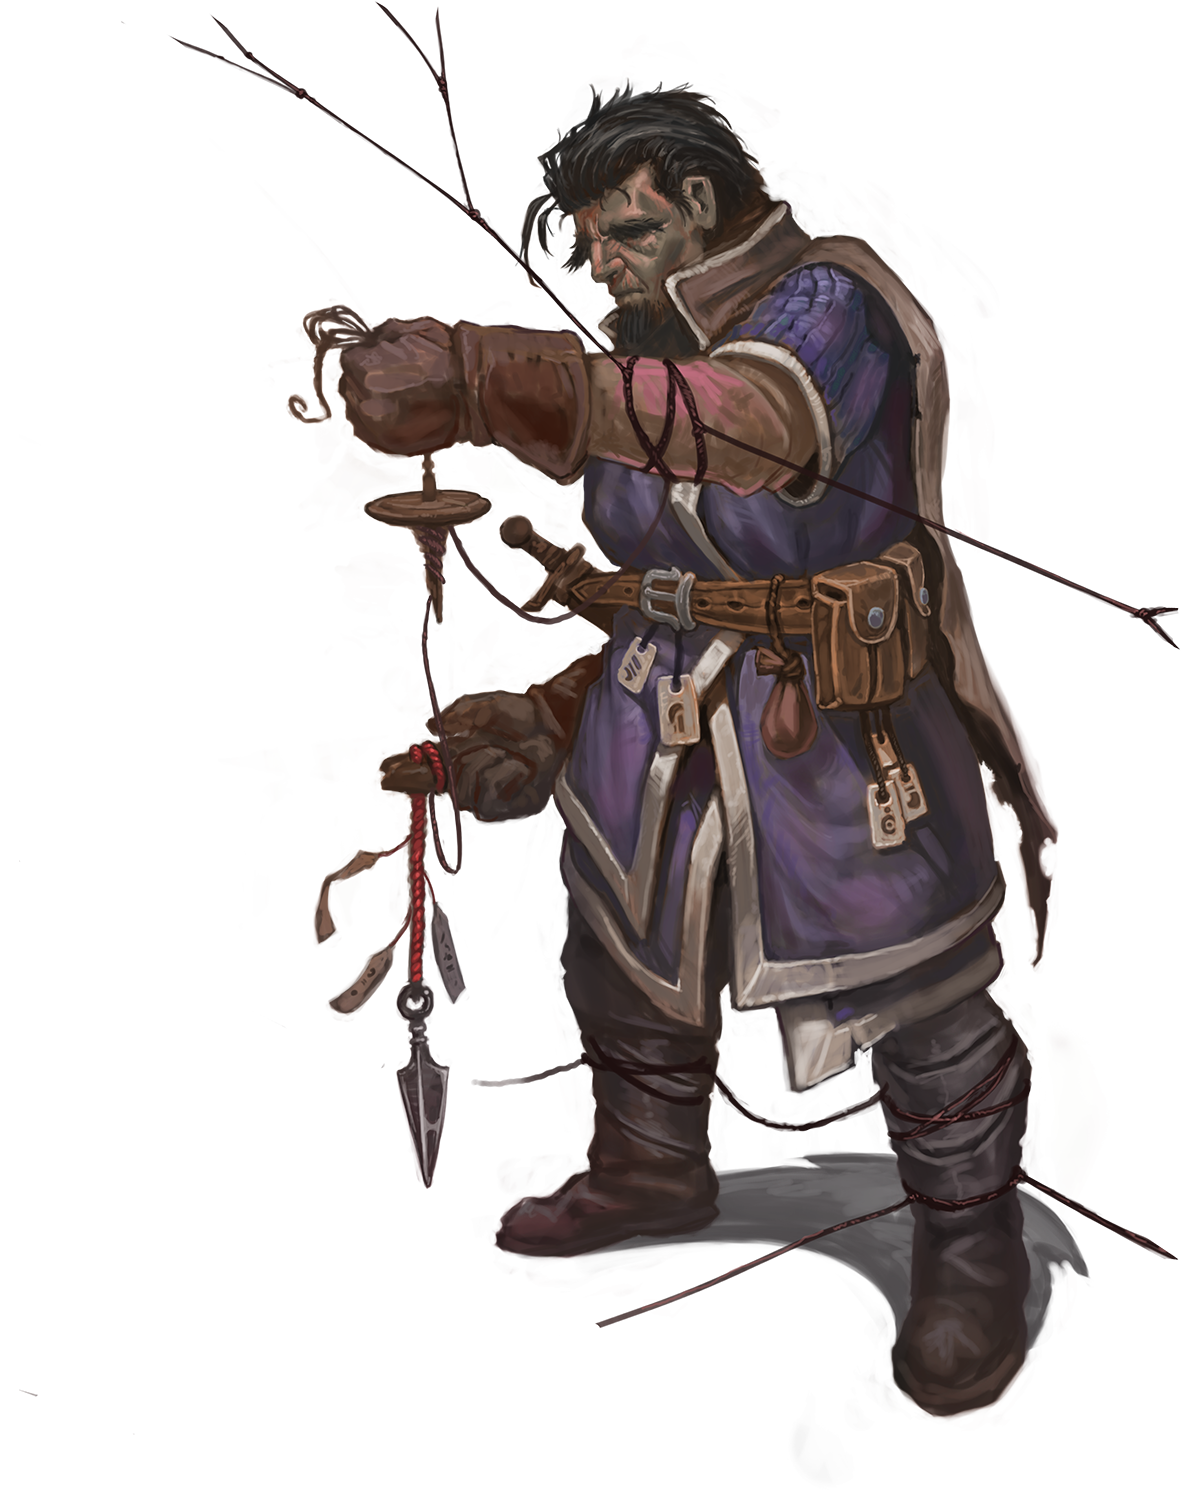 A human man with dark hair and layered purple hunting gear. In one hands he holds a drop spindle, spinning a red rope. In the other hand is a rope dart with the same red rope. Red ropes also attached to his arms and legs lead off in many directions off the page